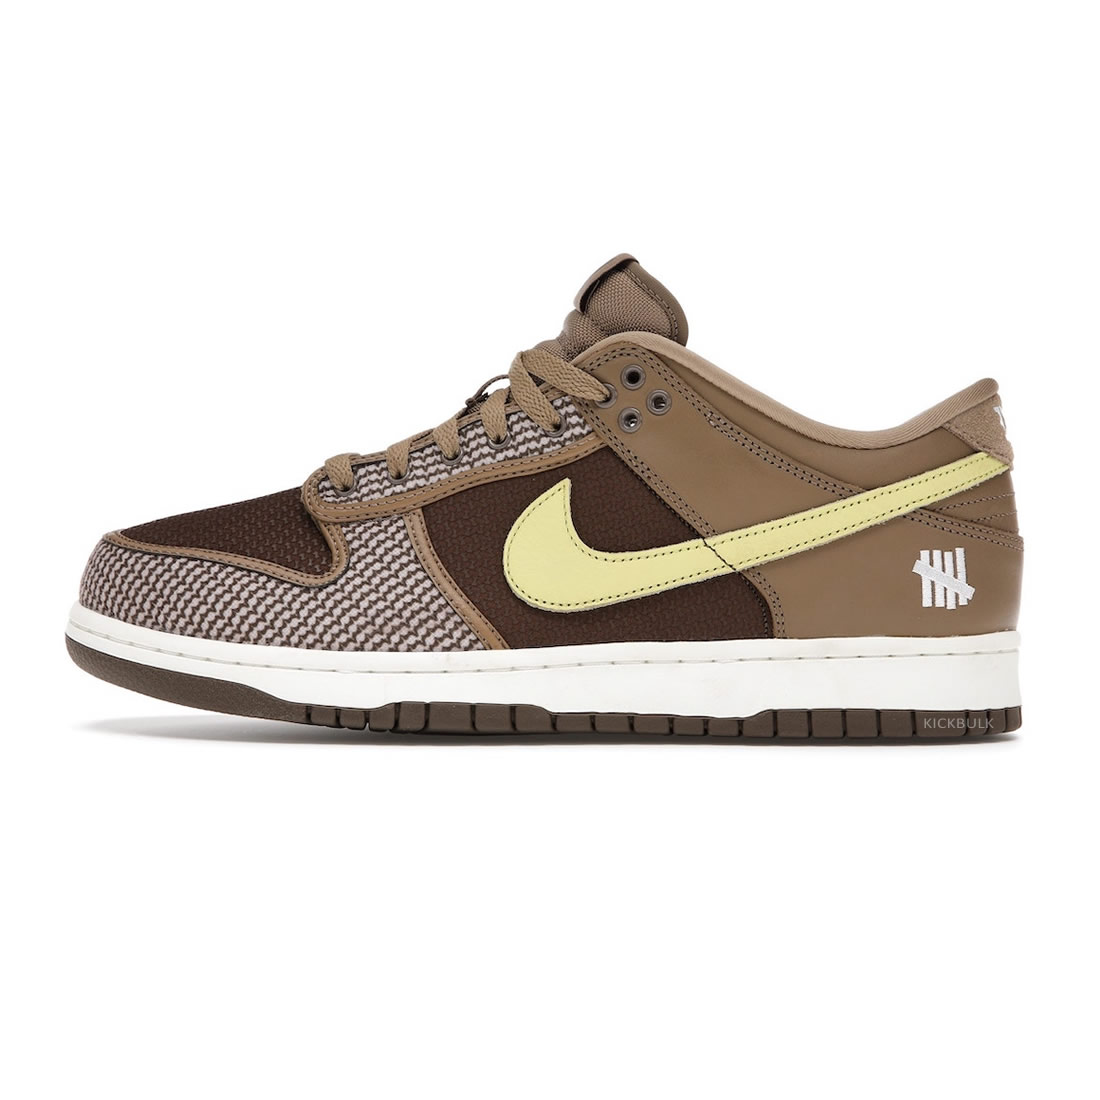 Undefeated Nike Dunk Low Sp Canteen Dh3061 200 1 - www.kickbulk.co